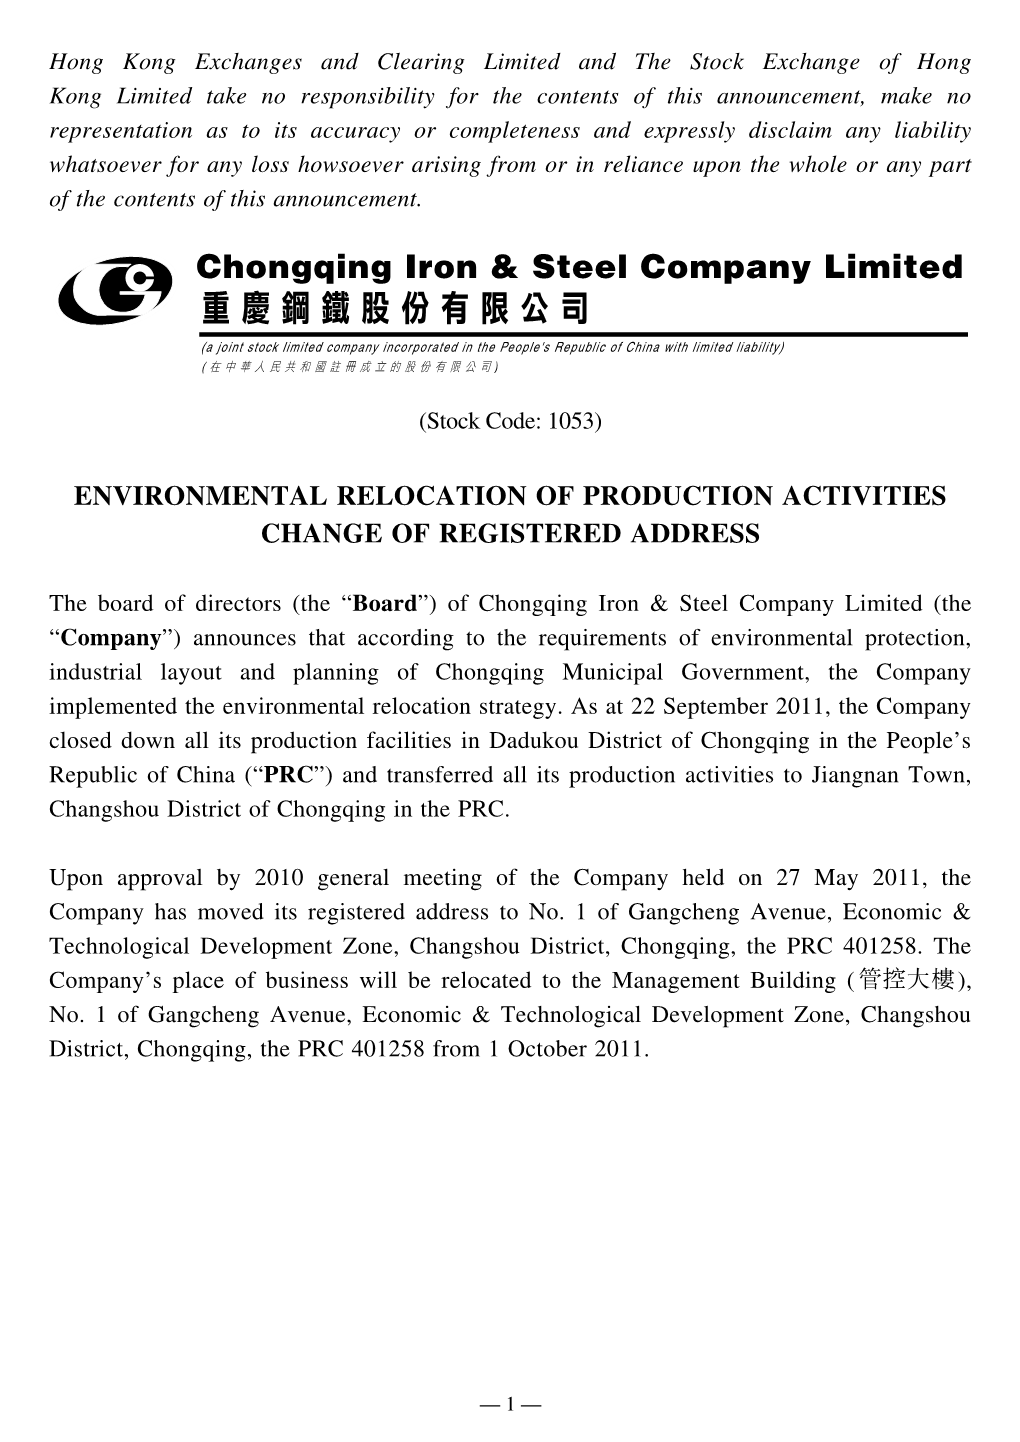 Environmental Relocation of Production Activities Change of Registered Address